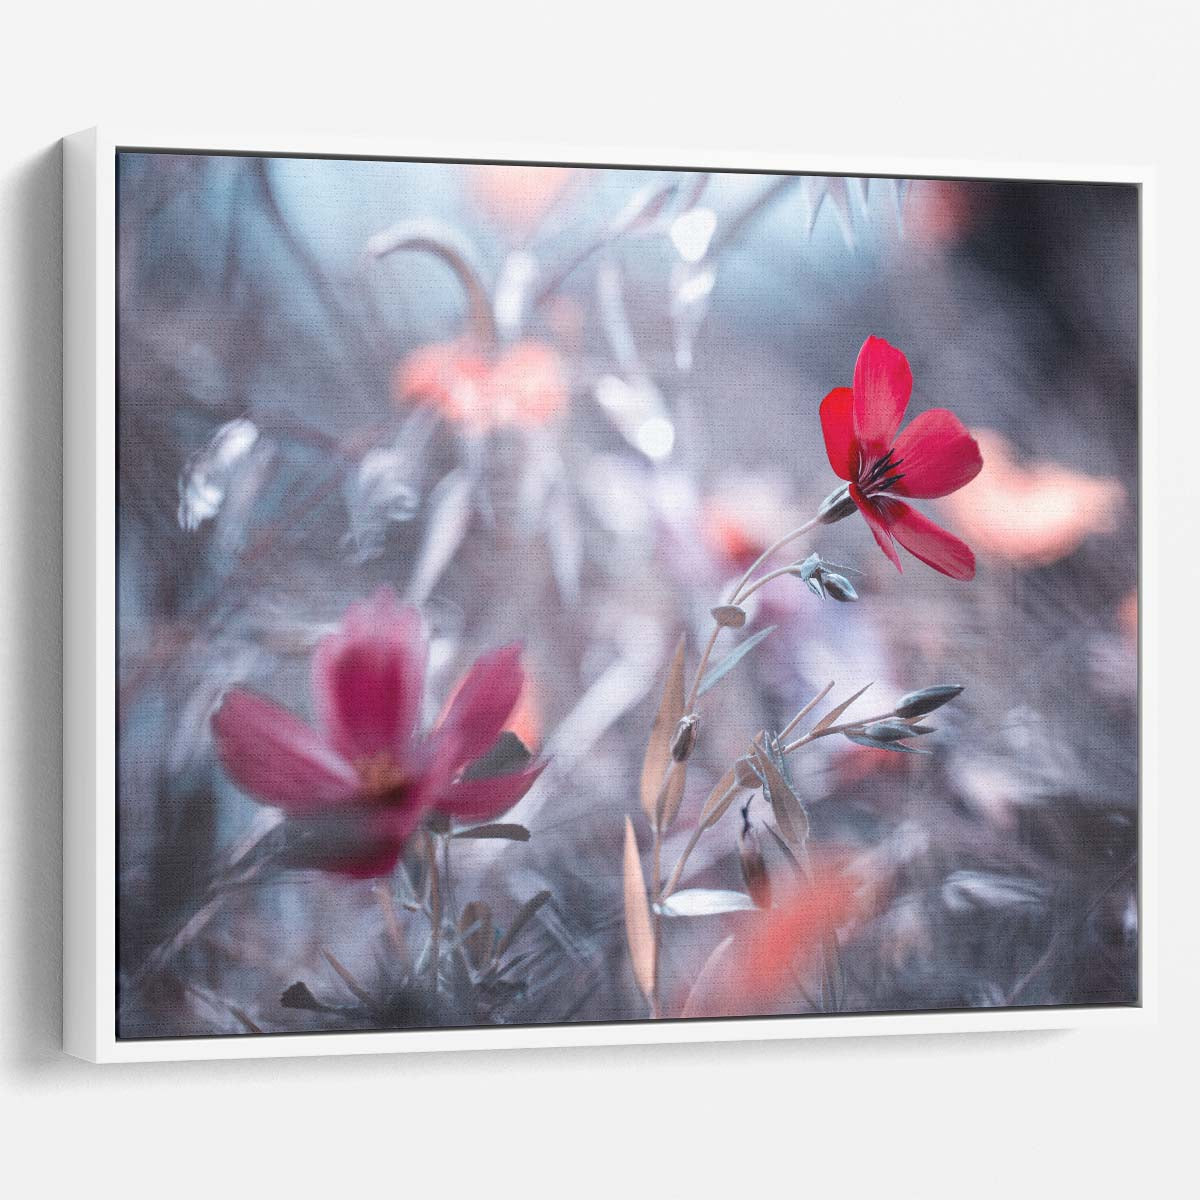 Romantic Red Floral Bokeh Love Macro Wall Art by Luxuriance Designs. Made in USA.